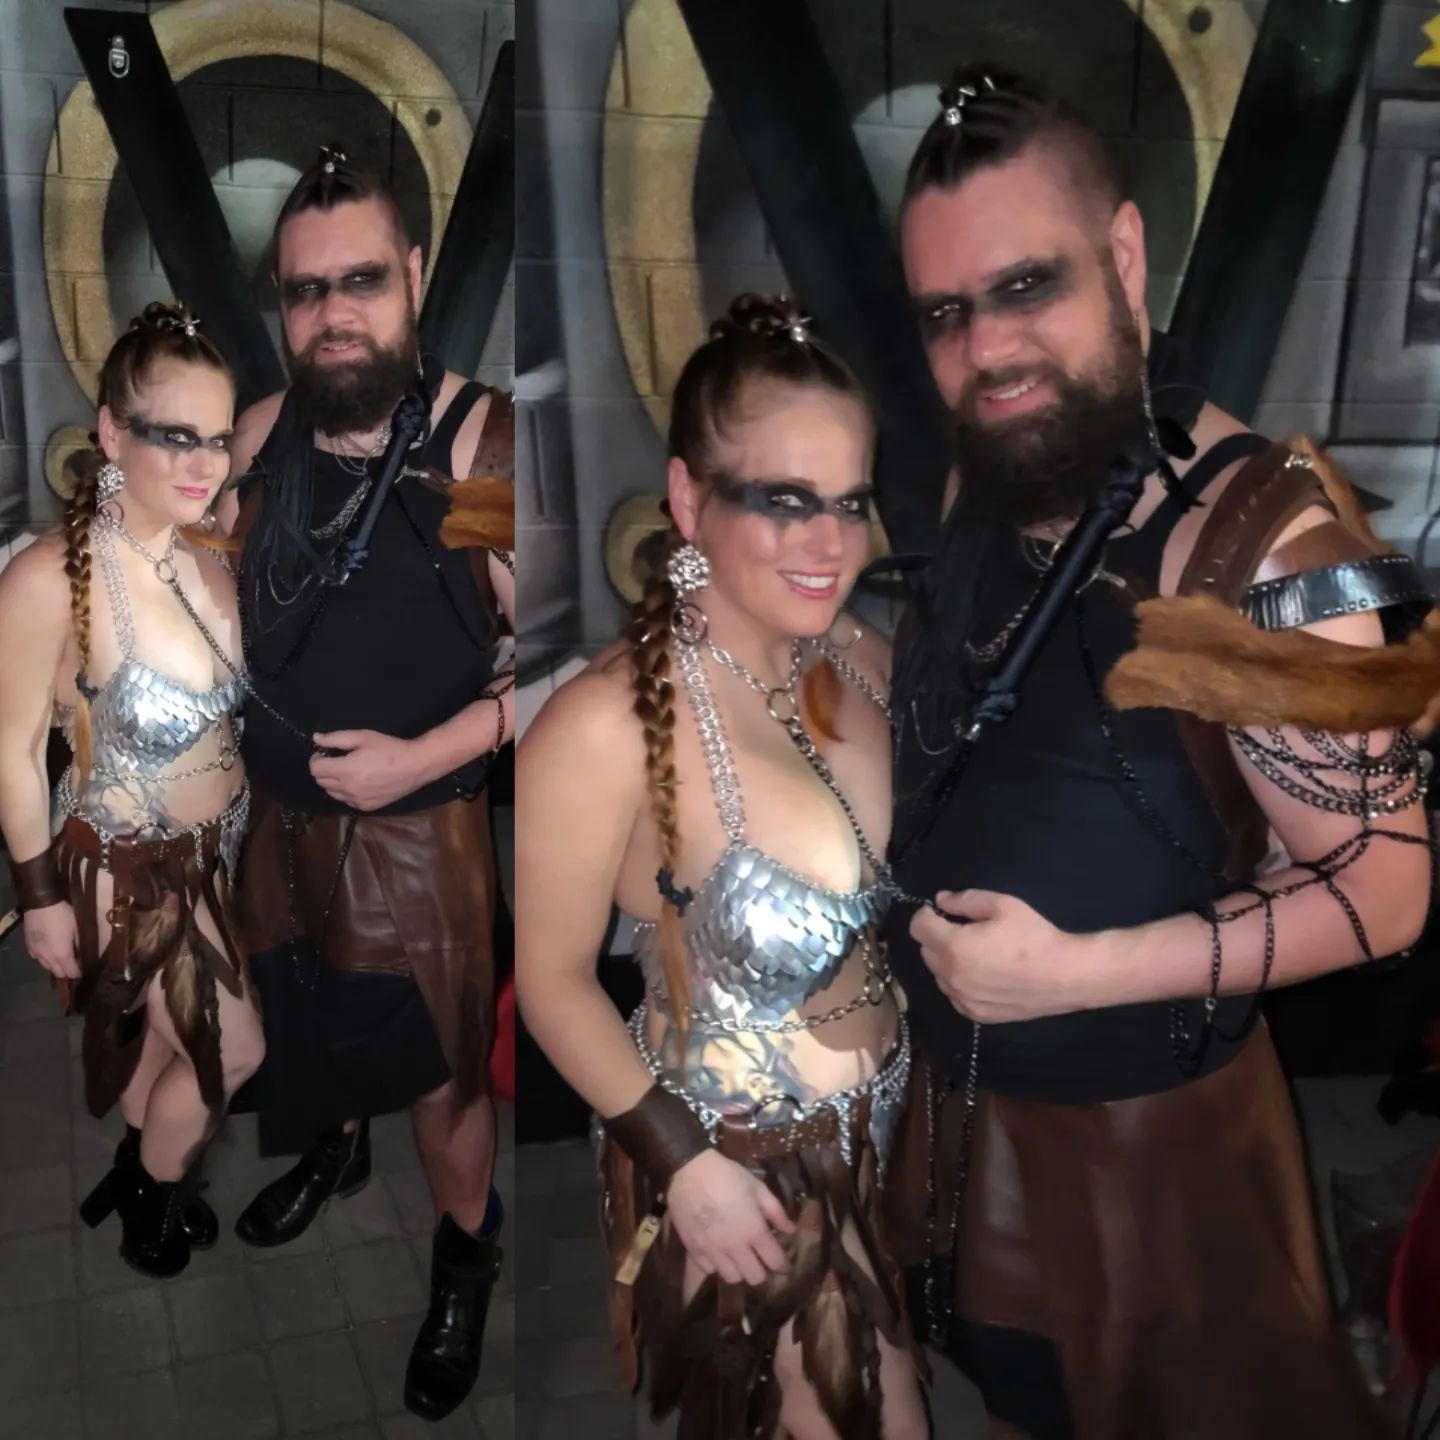 I can't believe these are the ONLY pictures we took the night of #torturegardenlv 
I used my Red Sonja bikini and crafted these costumes up in about 24 hours 😅 while streaming on ePlay

If I was smarter I would have taken video clips of the process to share in a reel 🙈 I pulled apart an old leather jacket, a thrifted fur coat, and some extra belts from our closets then pieced them together with a bunch of chains to make Sir's armored shirt, his kilt, and my skirt. His kilt even has a hidden pocket! 

We completed the look with matching barbarian makeup and spiked mohawks.

Scalemail bikini: @blackmystclothing
Hair spikes and my earrings: @regalrose 

Do you want to see more content sharing my creative process? Let me know! ⬇️⬇️⬇️

@eplay_academy @eplay_official @thechrissyleblanc @torturegardenclub @area15official